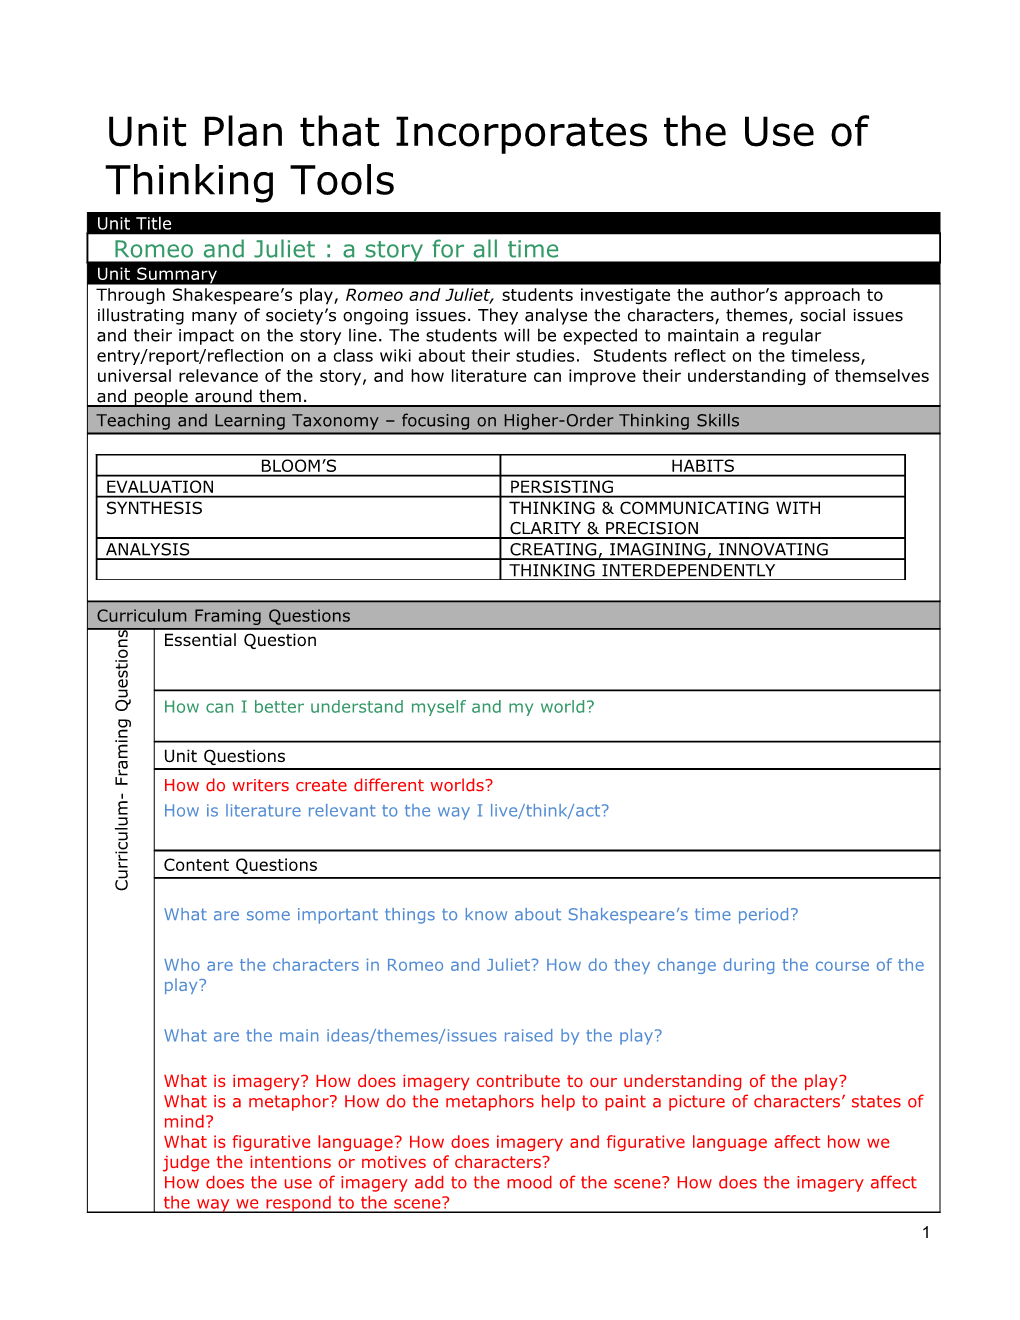 Unit Plan That Incorporates the Use of Thinking Tools